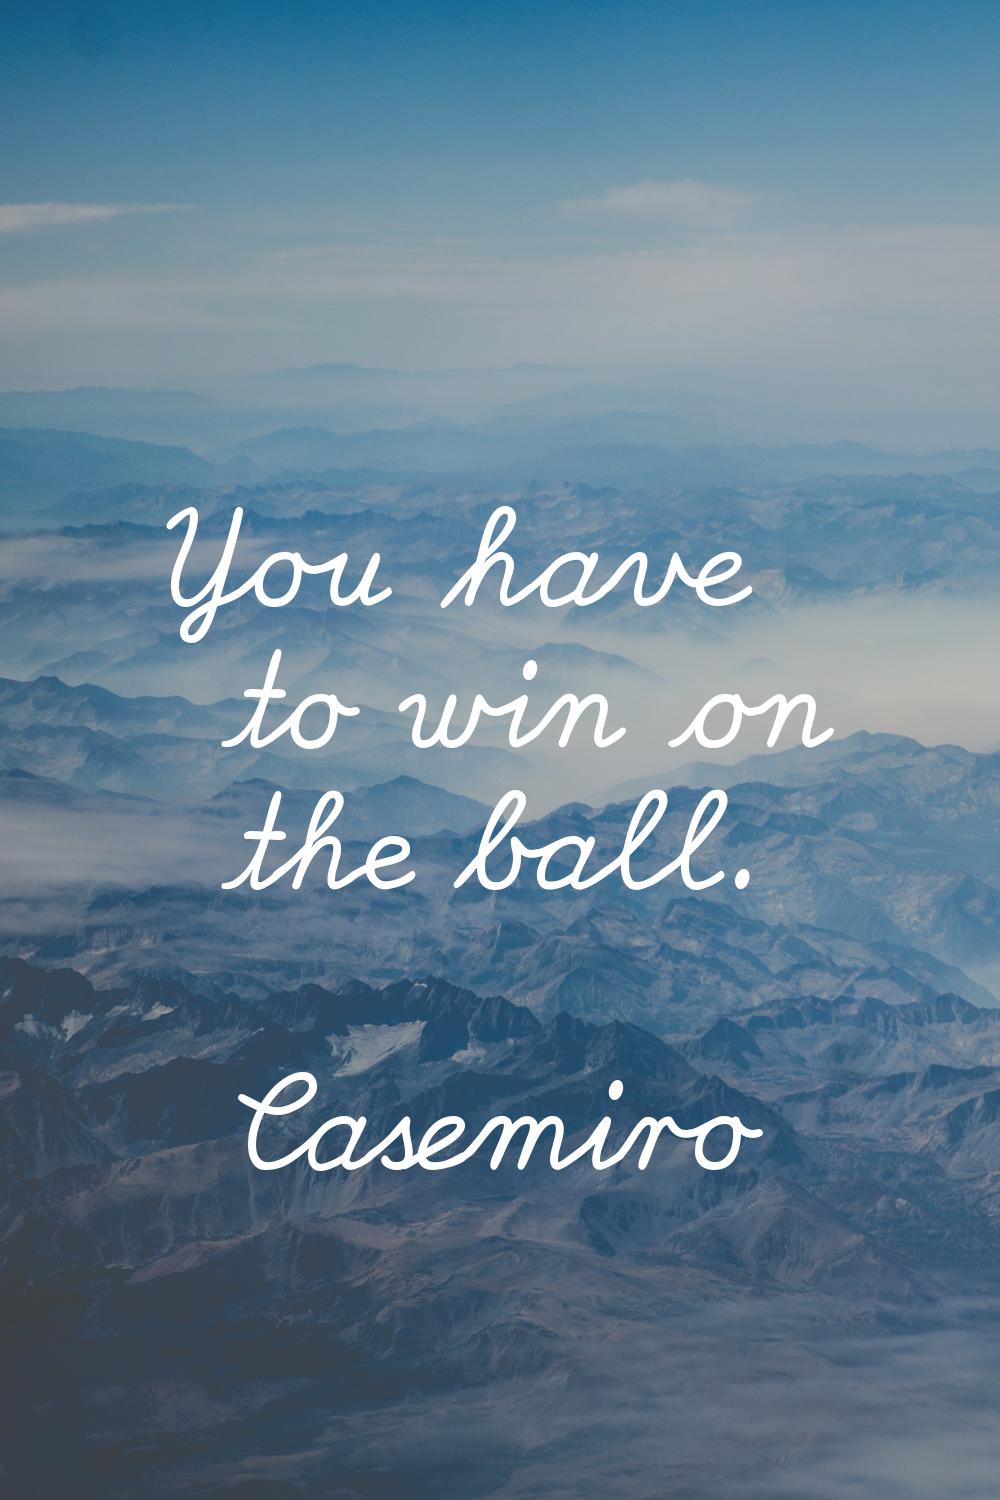 You have to win on the ball.